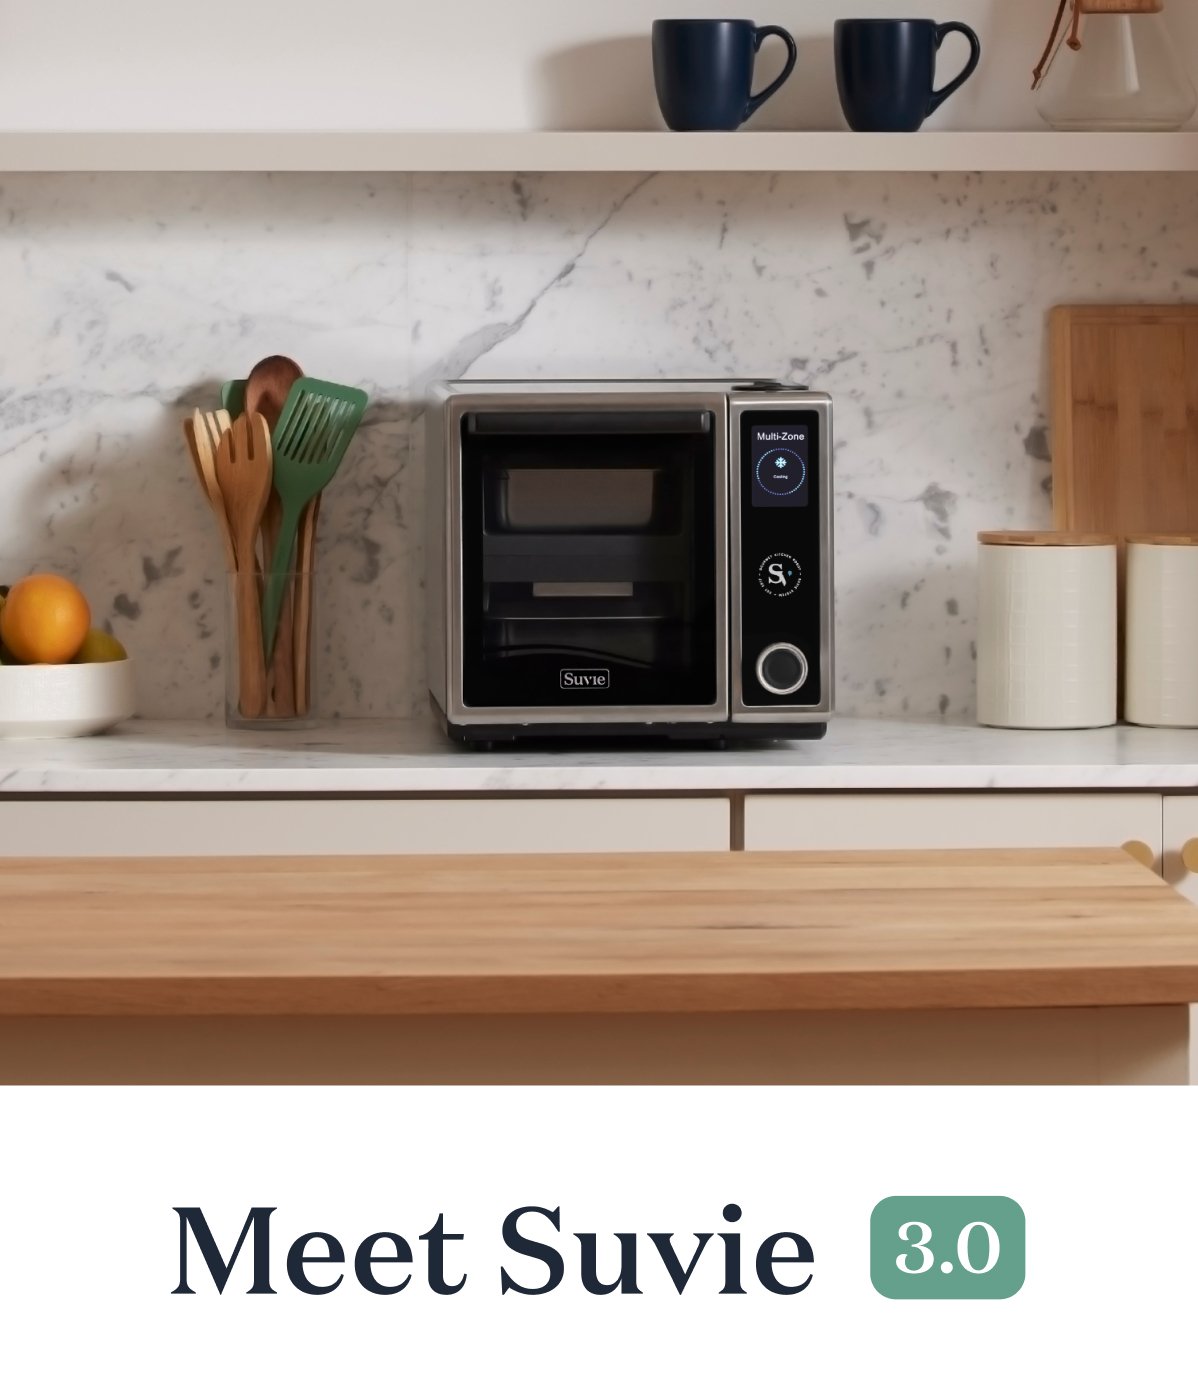 Suvie: Kitchen Robot with Multi-Zone Cooking & Refrigeration by